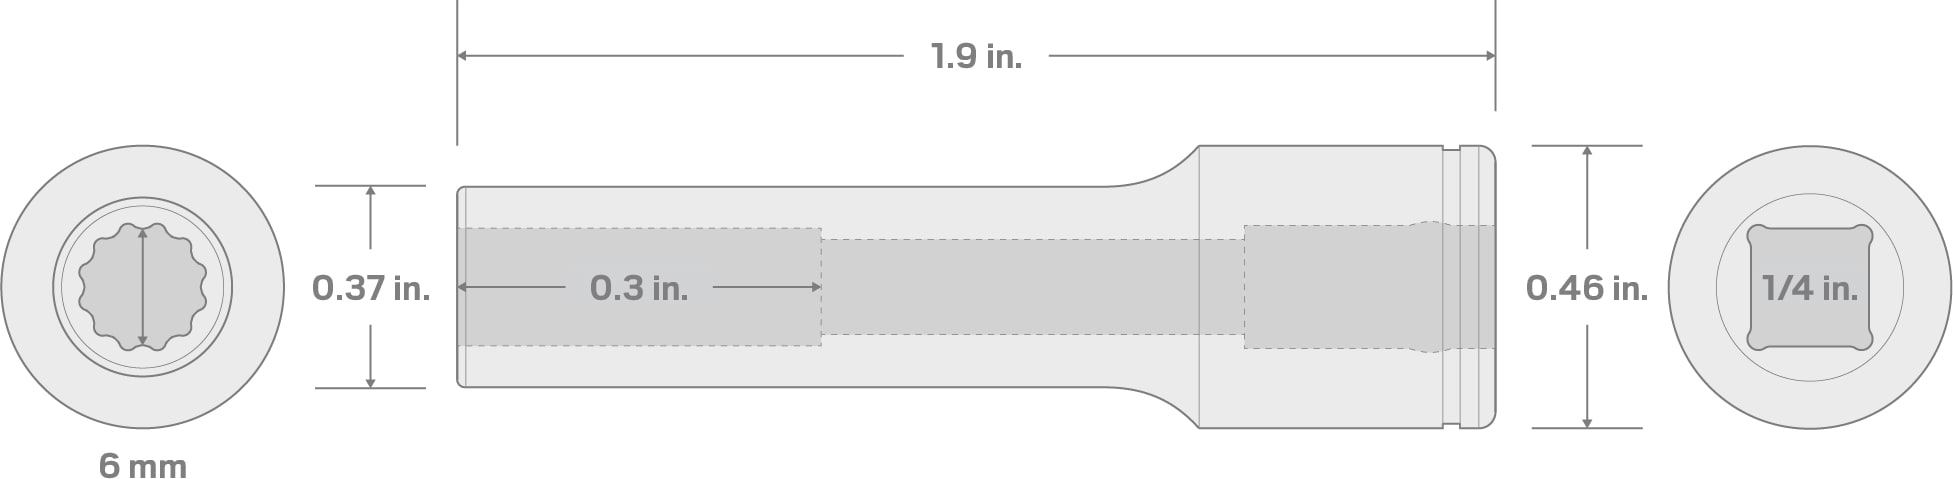 Specs for 1/4 Inch Drive x 6 mm Deep 12-Point Socket